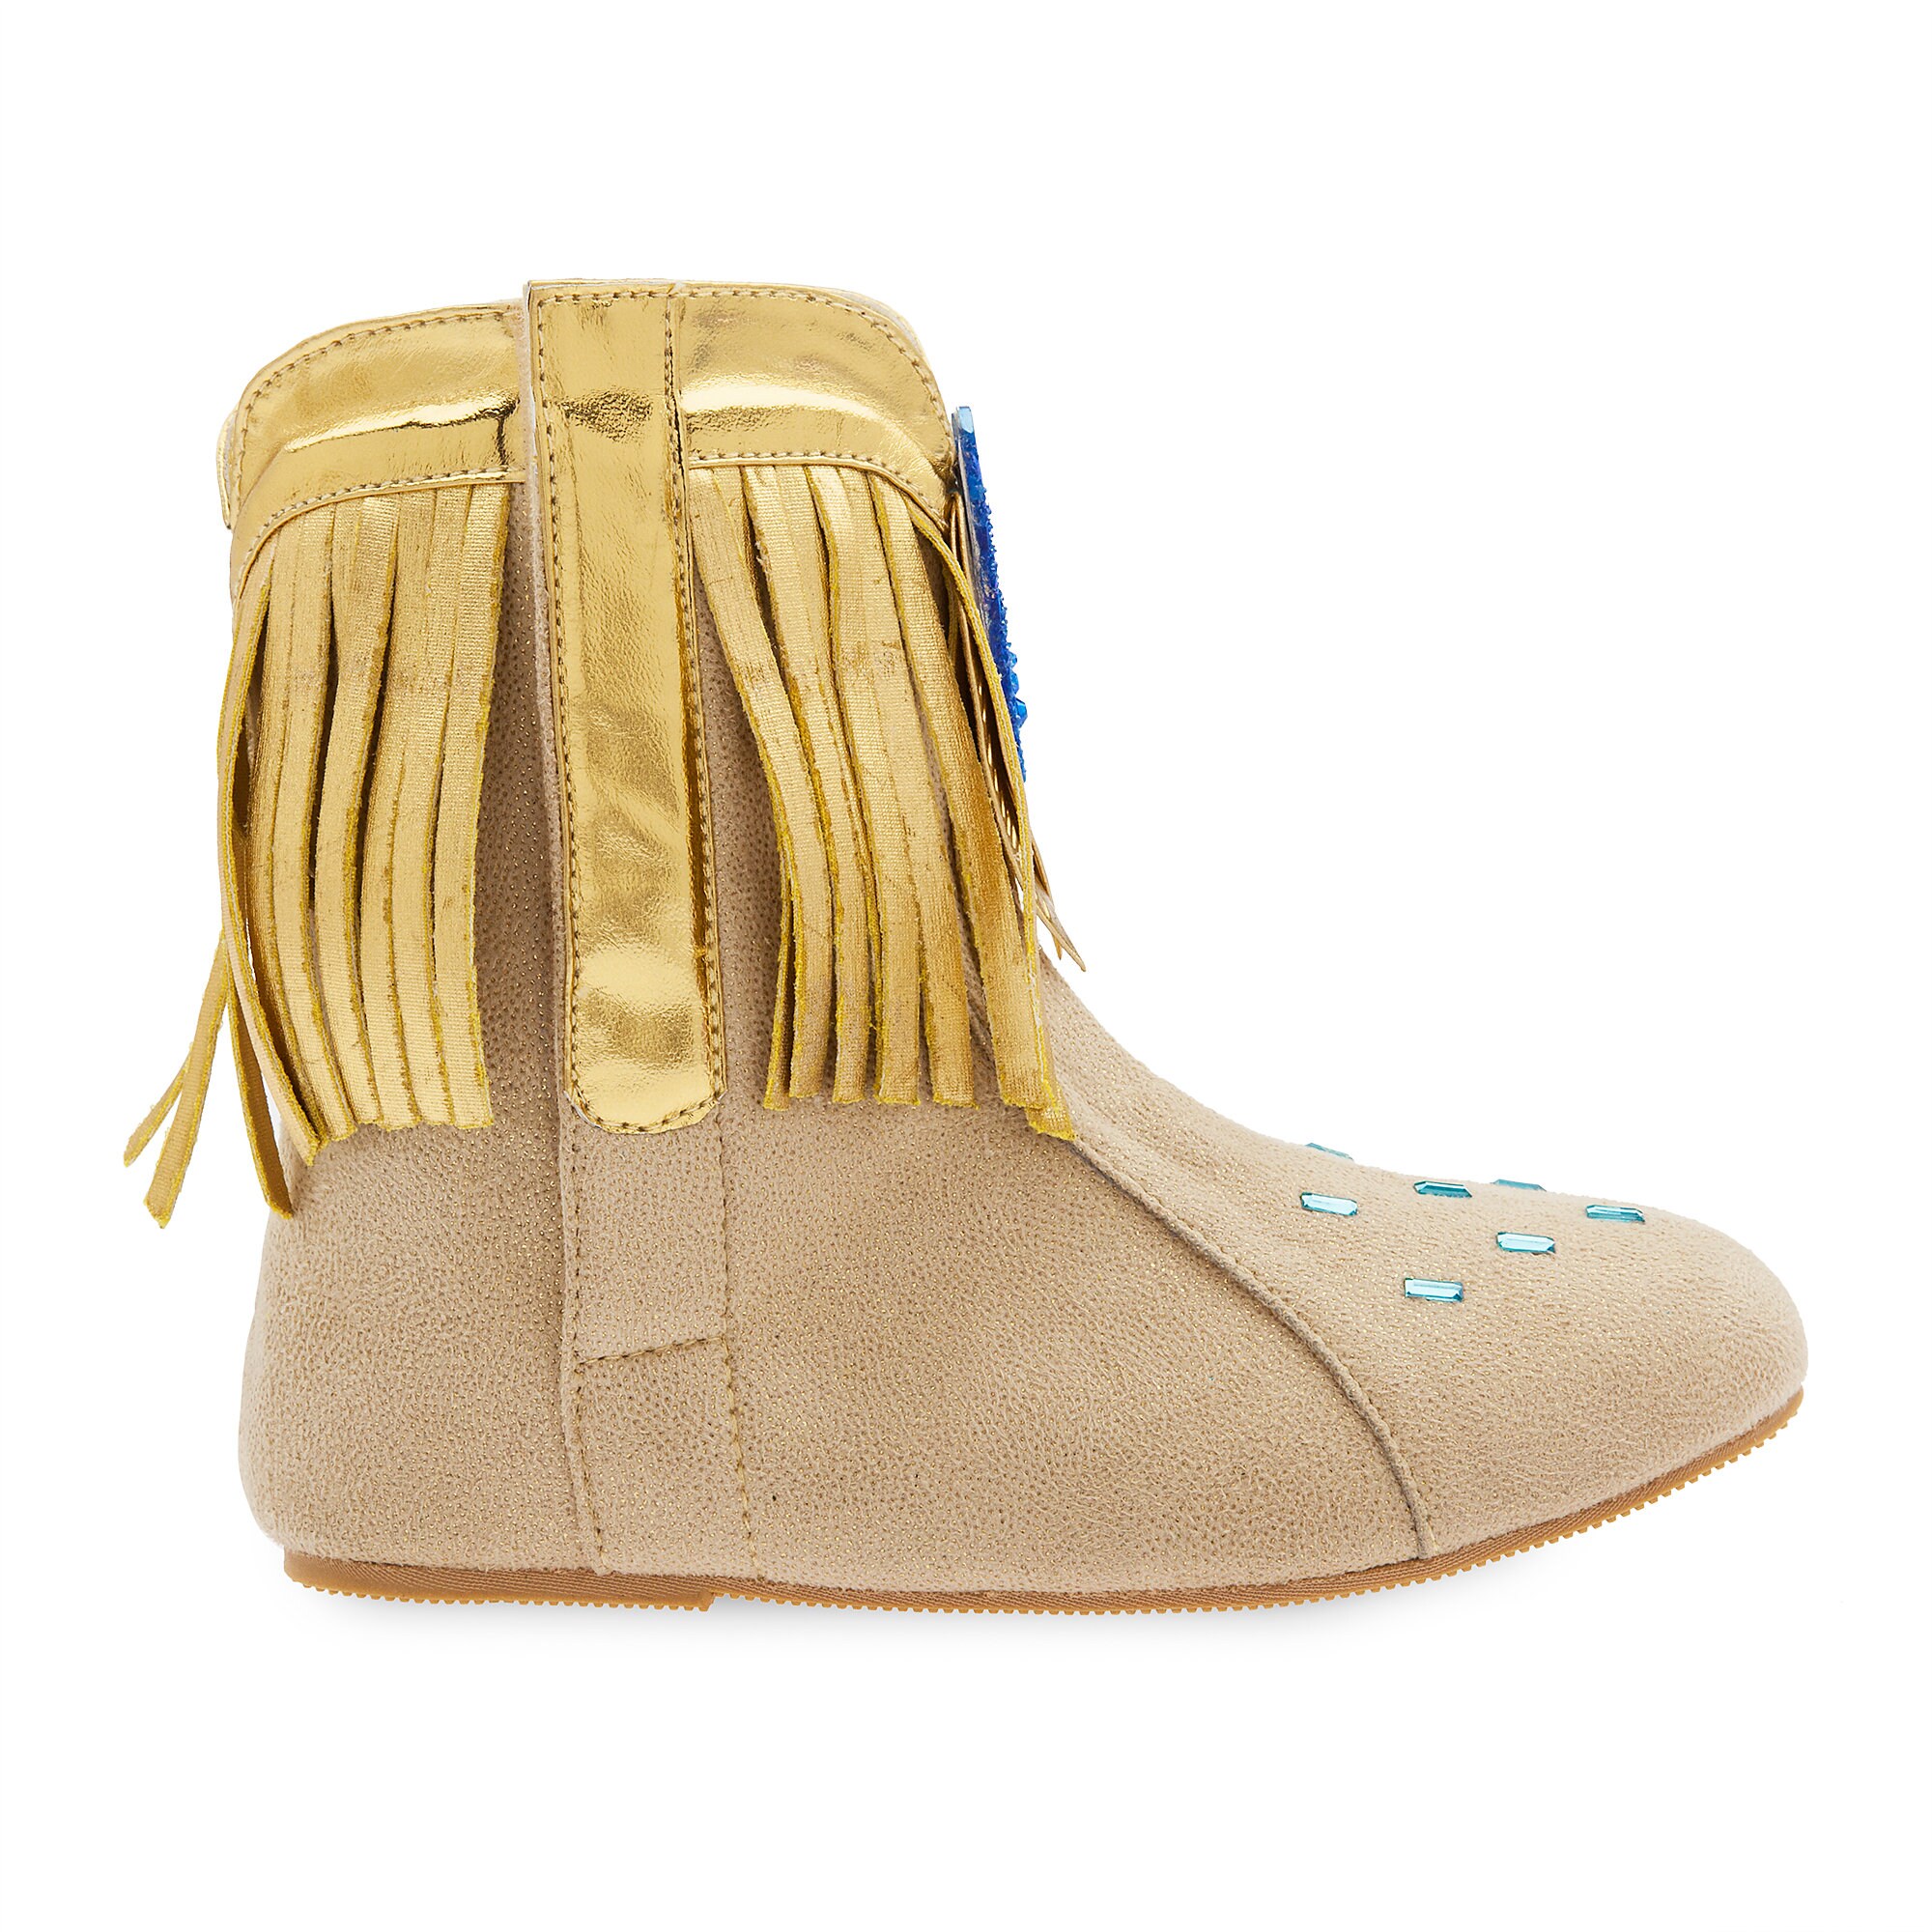 Pocahontas Costume Shoes for Kids